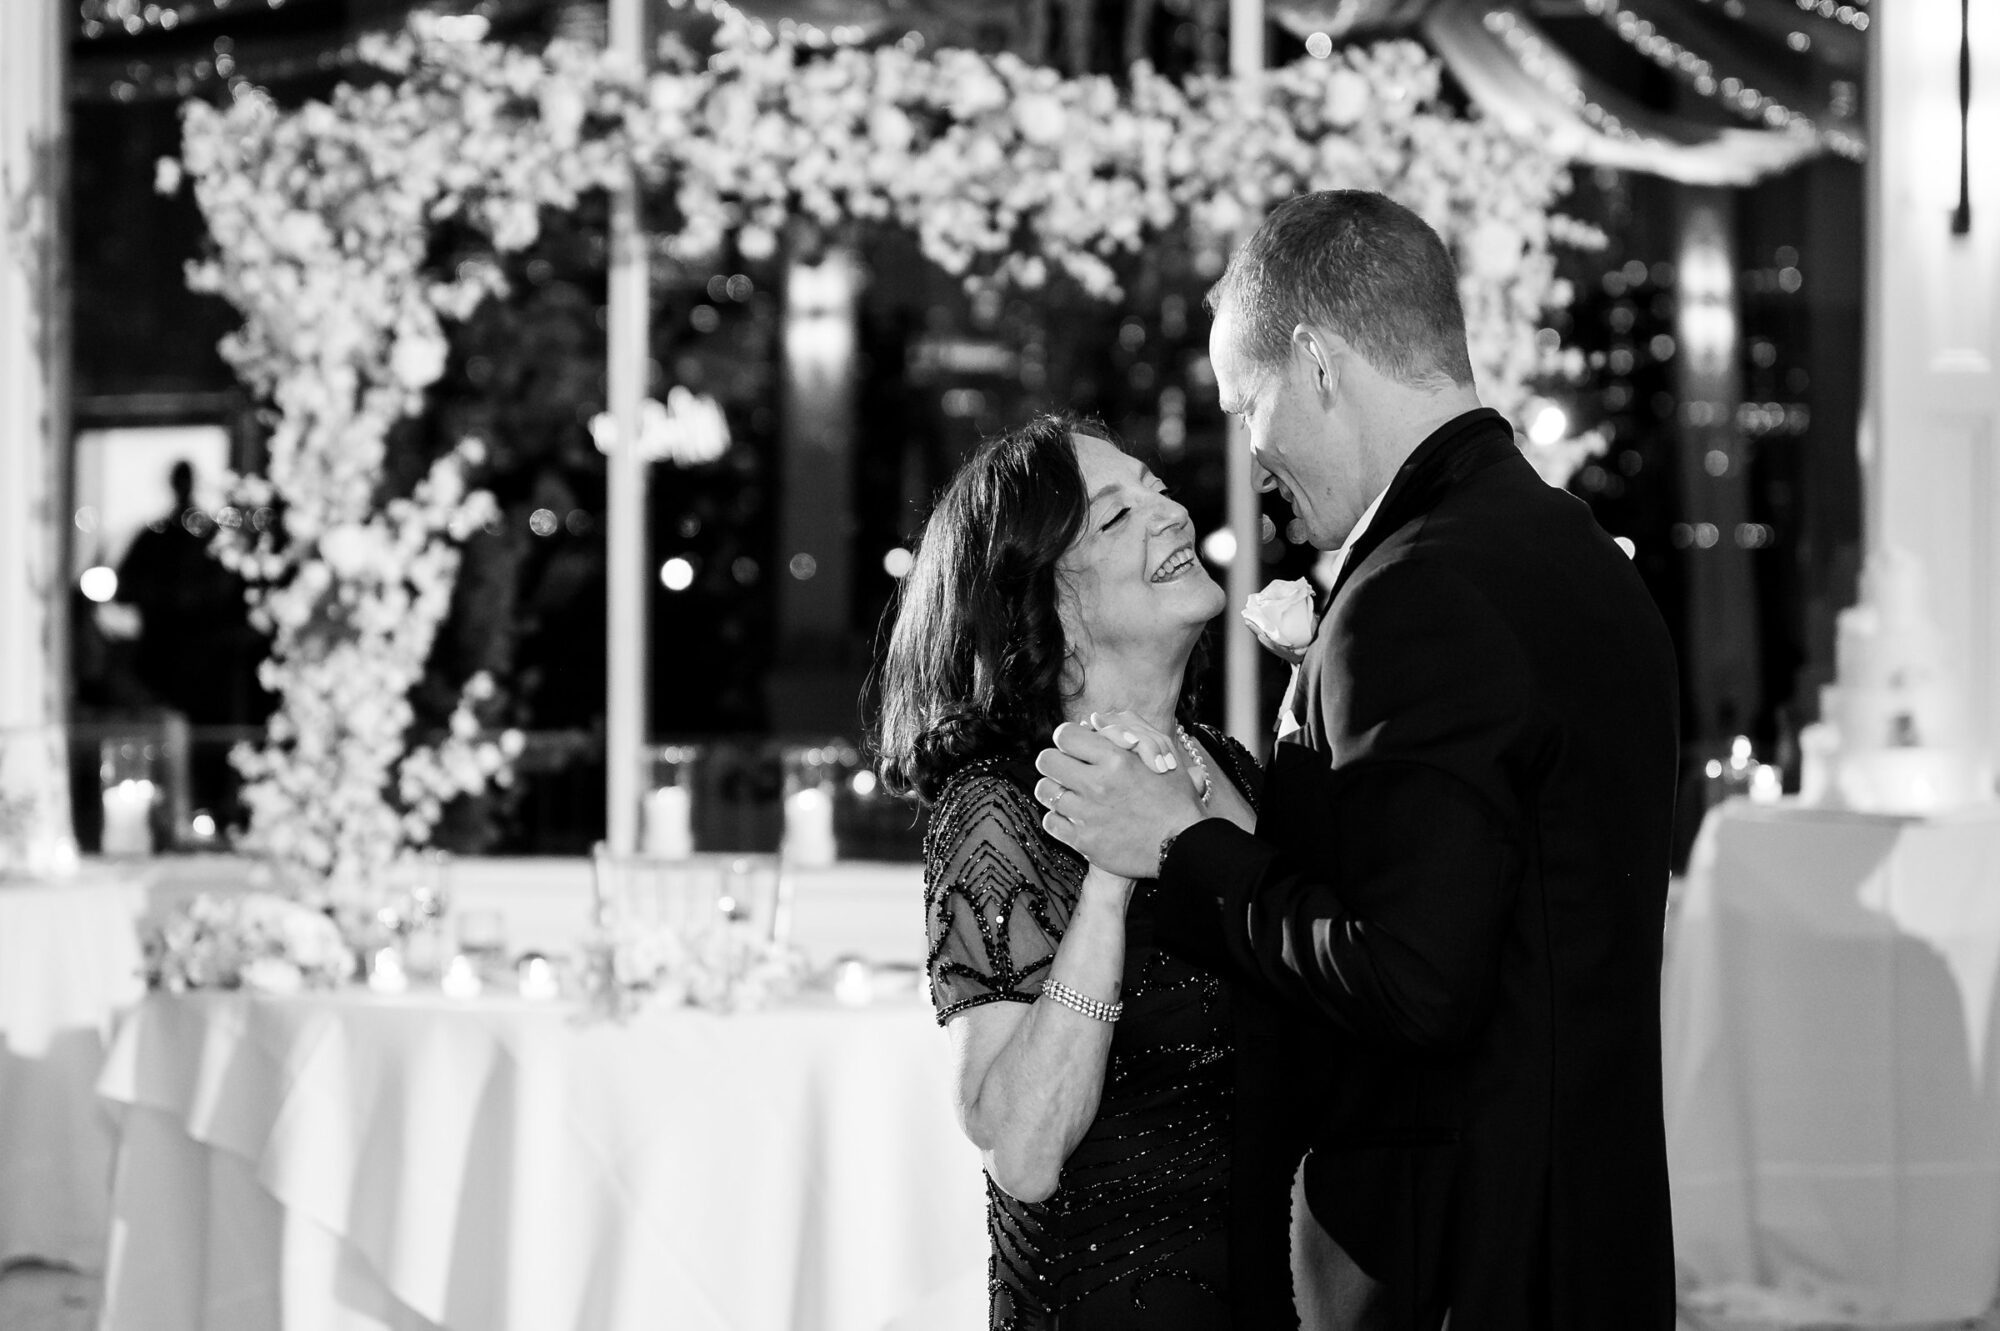 A mother and son sharing a first dance at a wedding.